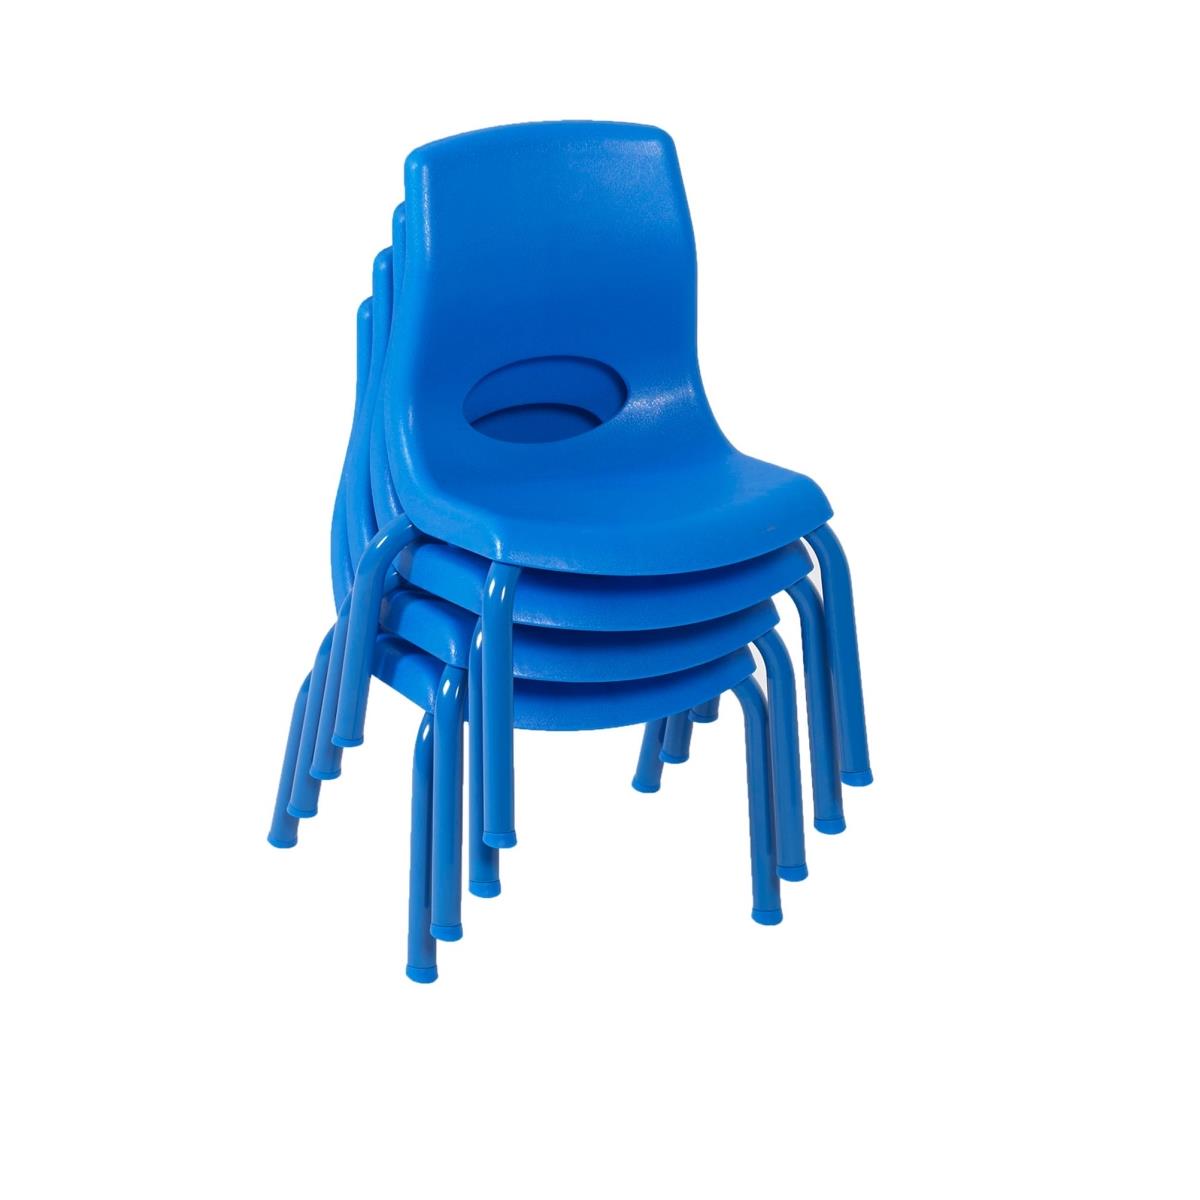 Ab8008pb4 8 In. Myposture Chair, Blue - Pack Of 4